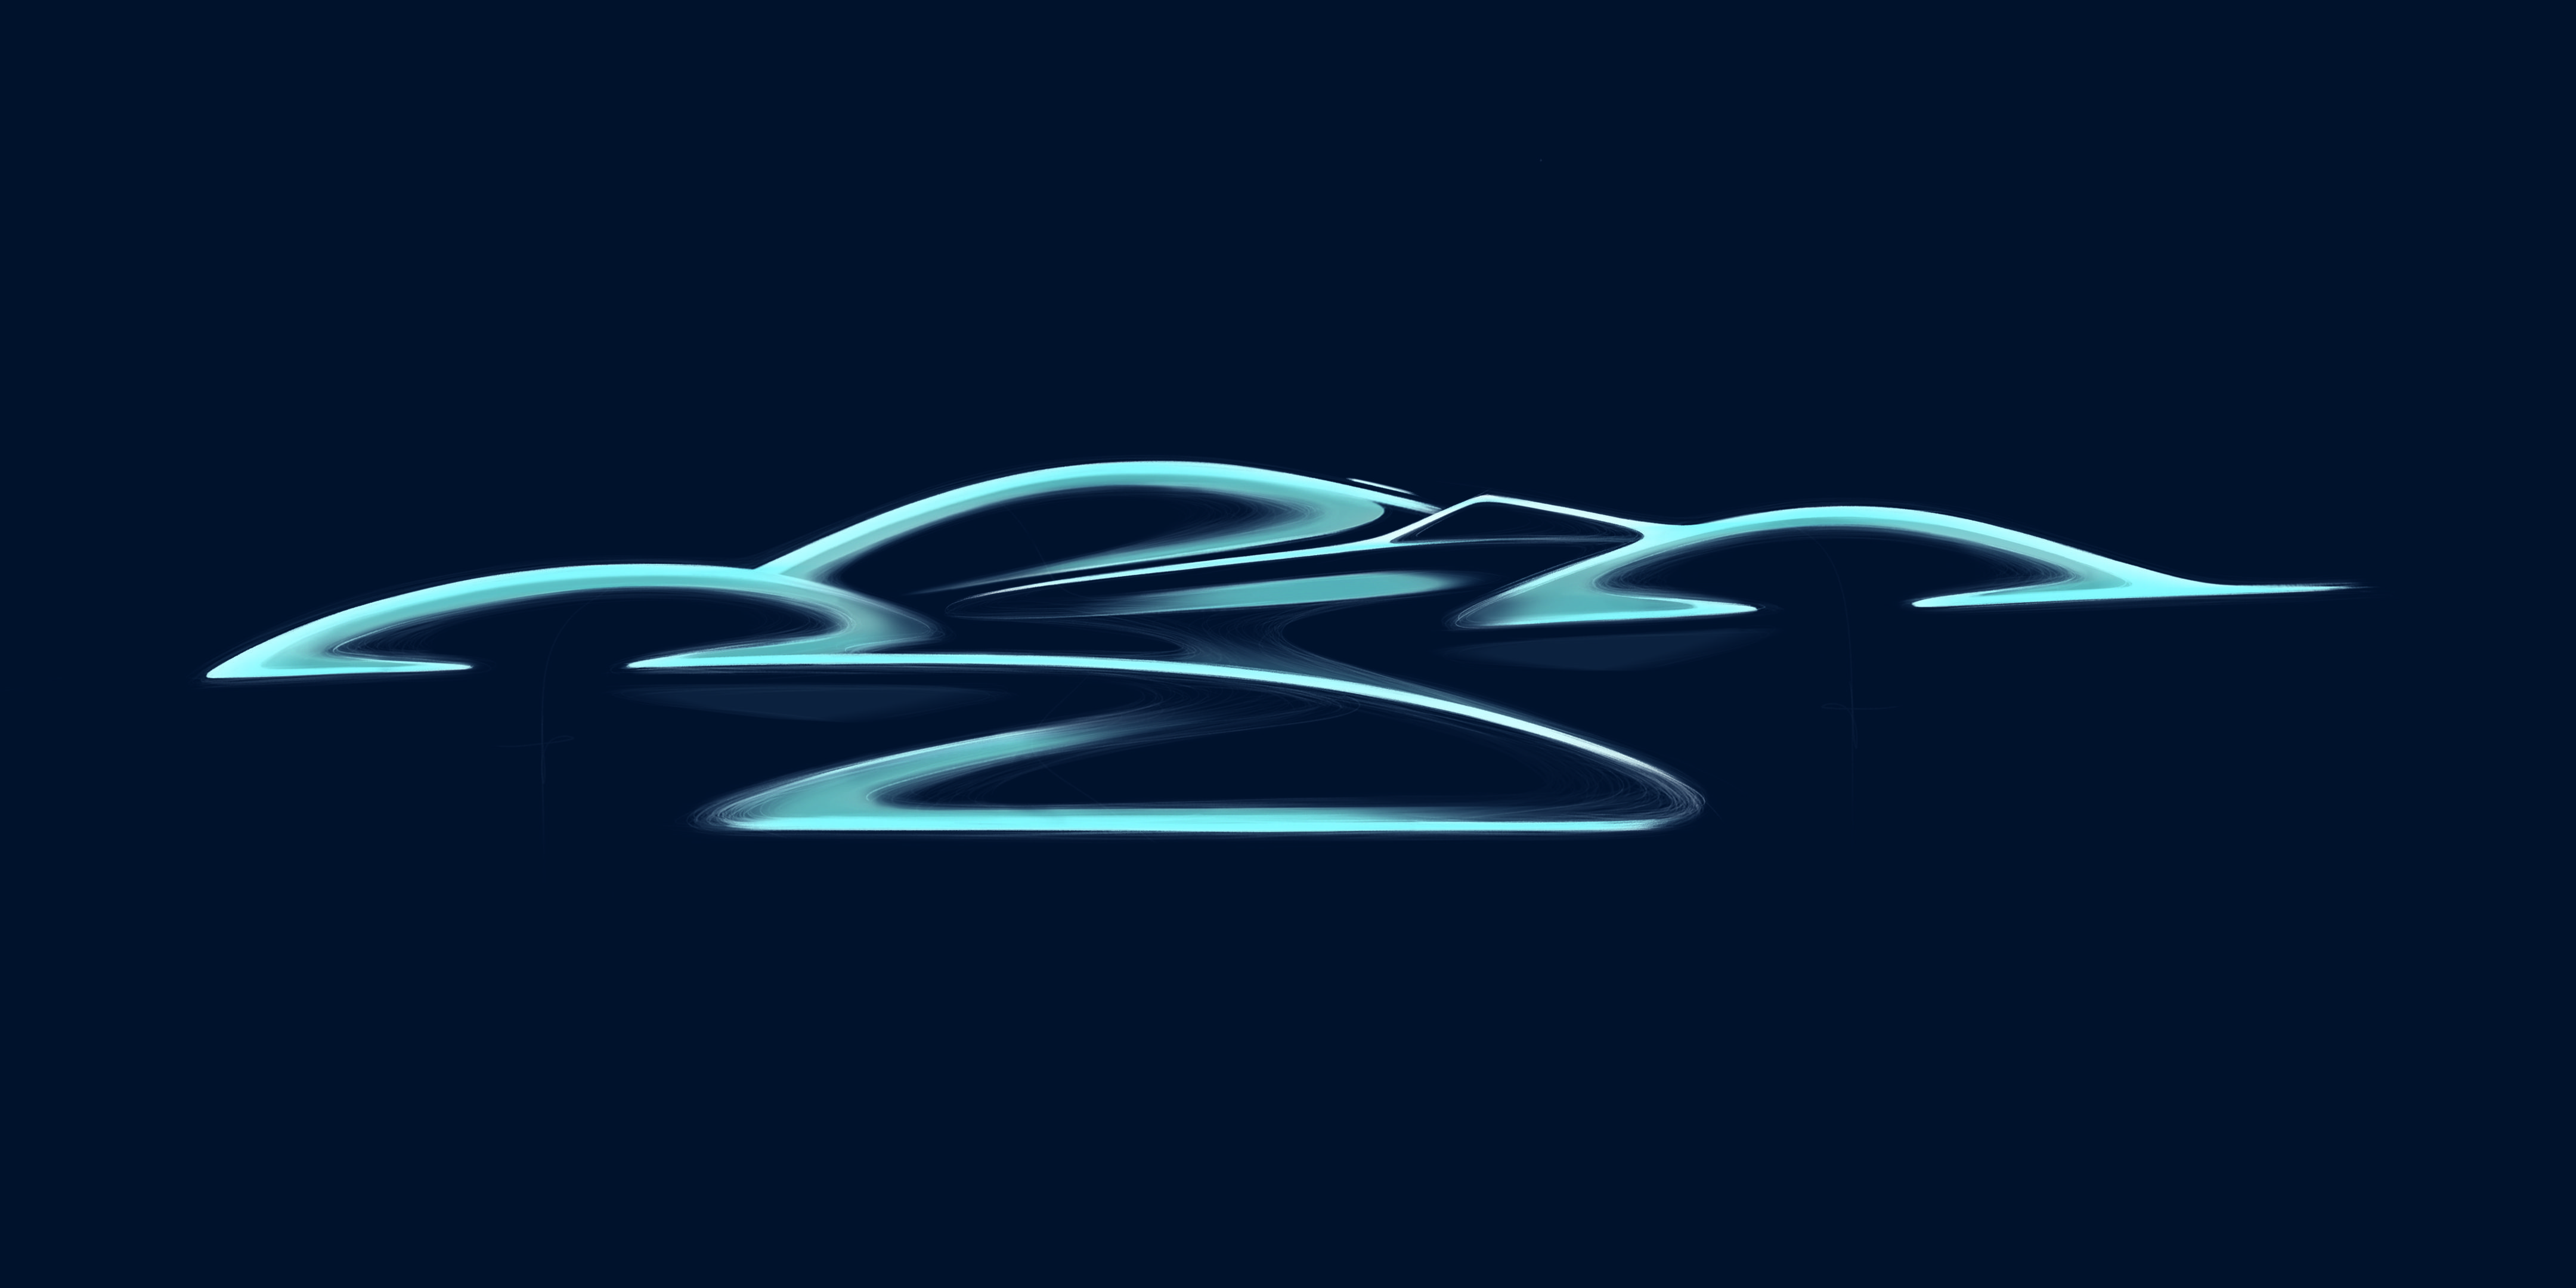 Red Bull Promises Its RB17 Hypercar Will Best the Valkyrie AMR Pro